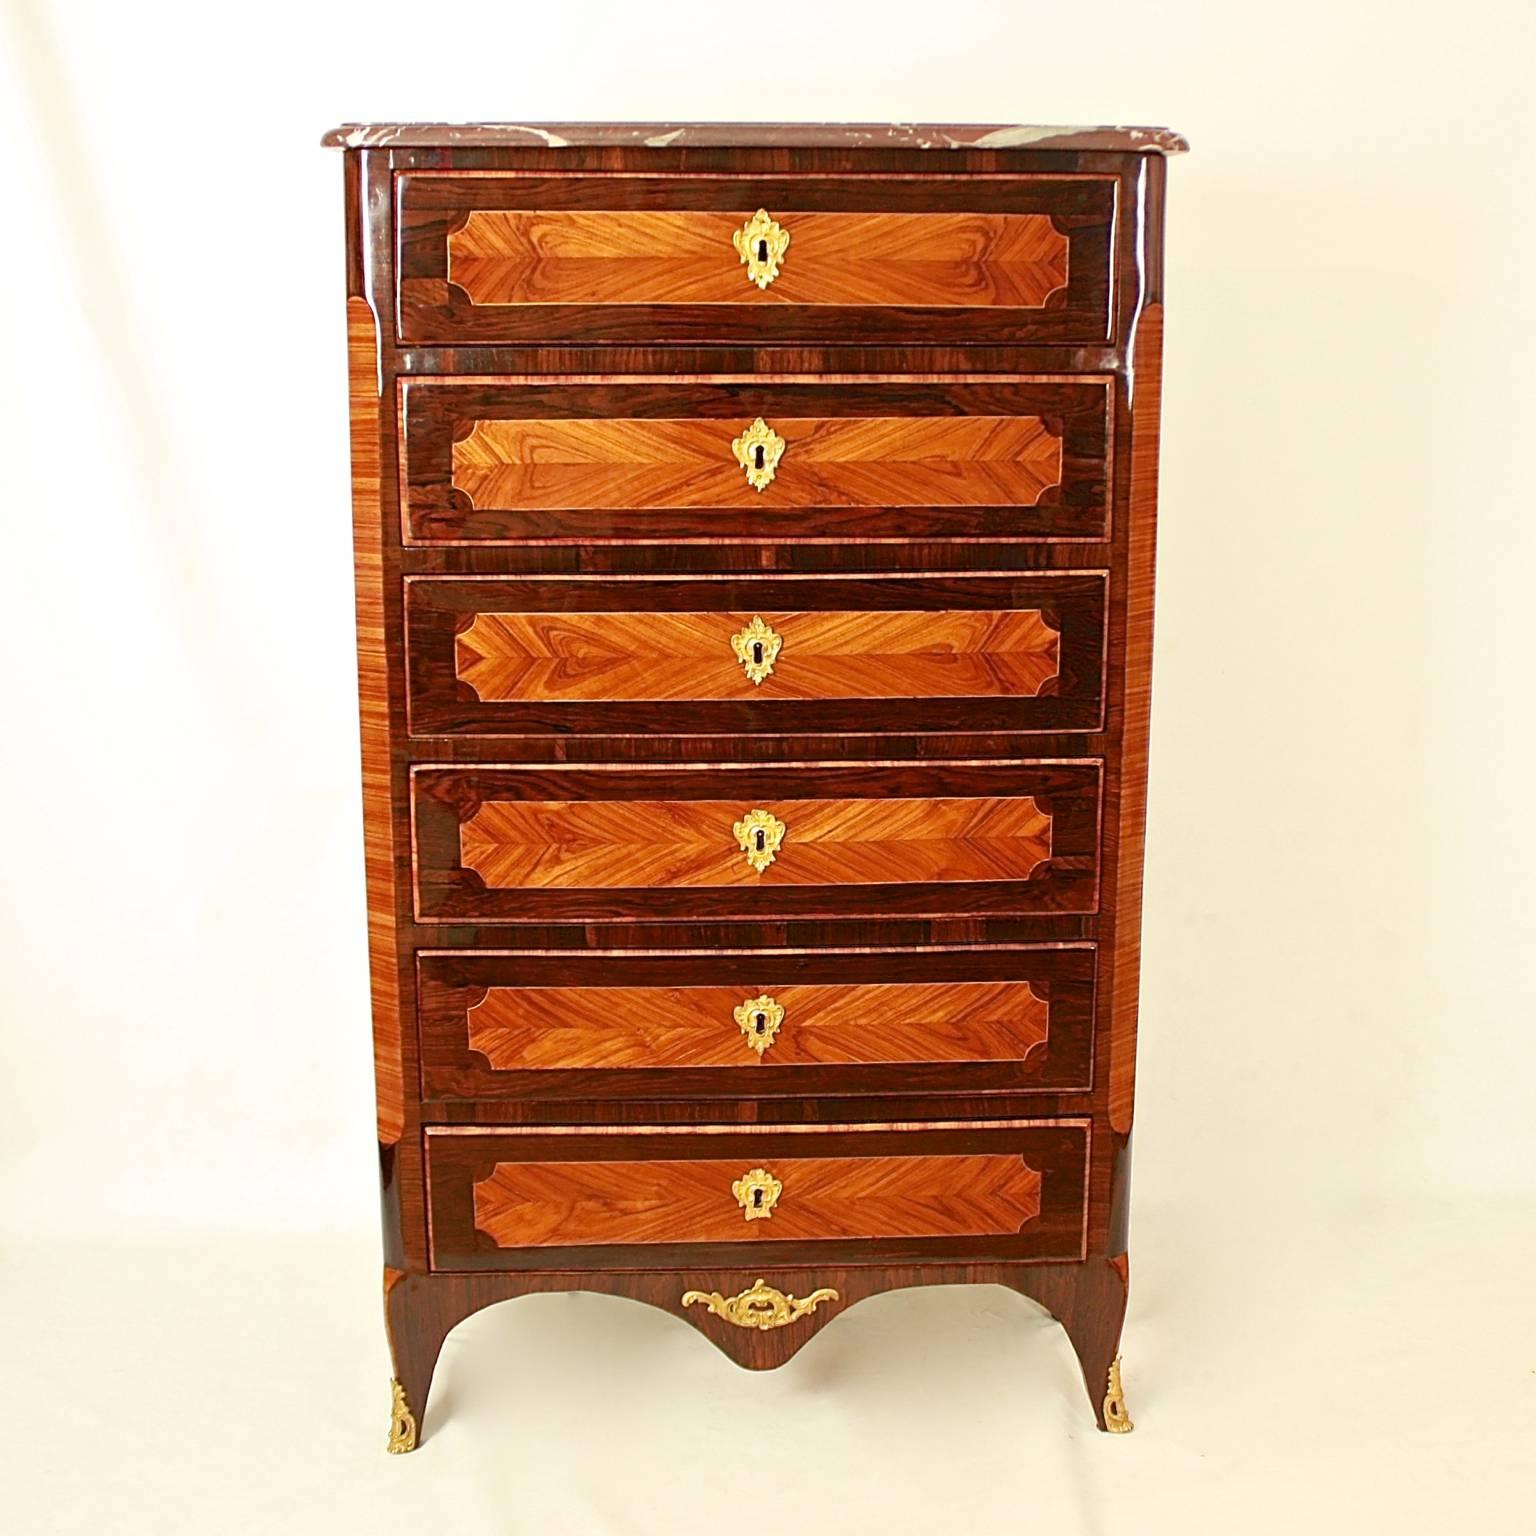 A French Louis XV tallboy or chest of drawers in the manner of Jean-Georges Schlichtig (mâitre 1765), with a moulded 'Rouge Languedoc' marble top above six drawers, each drawer veneered with cartouches of contrasting wood and fitted with foliate